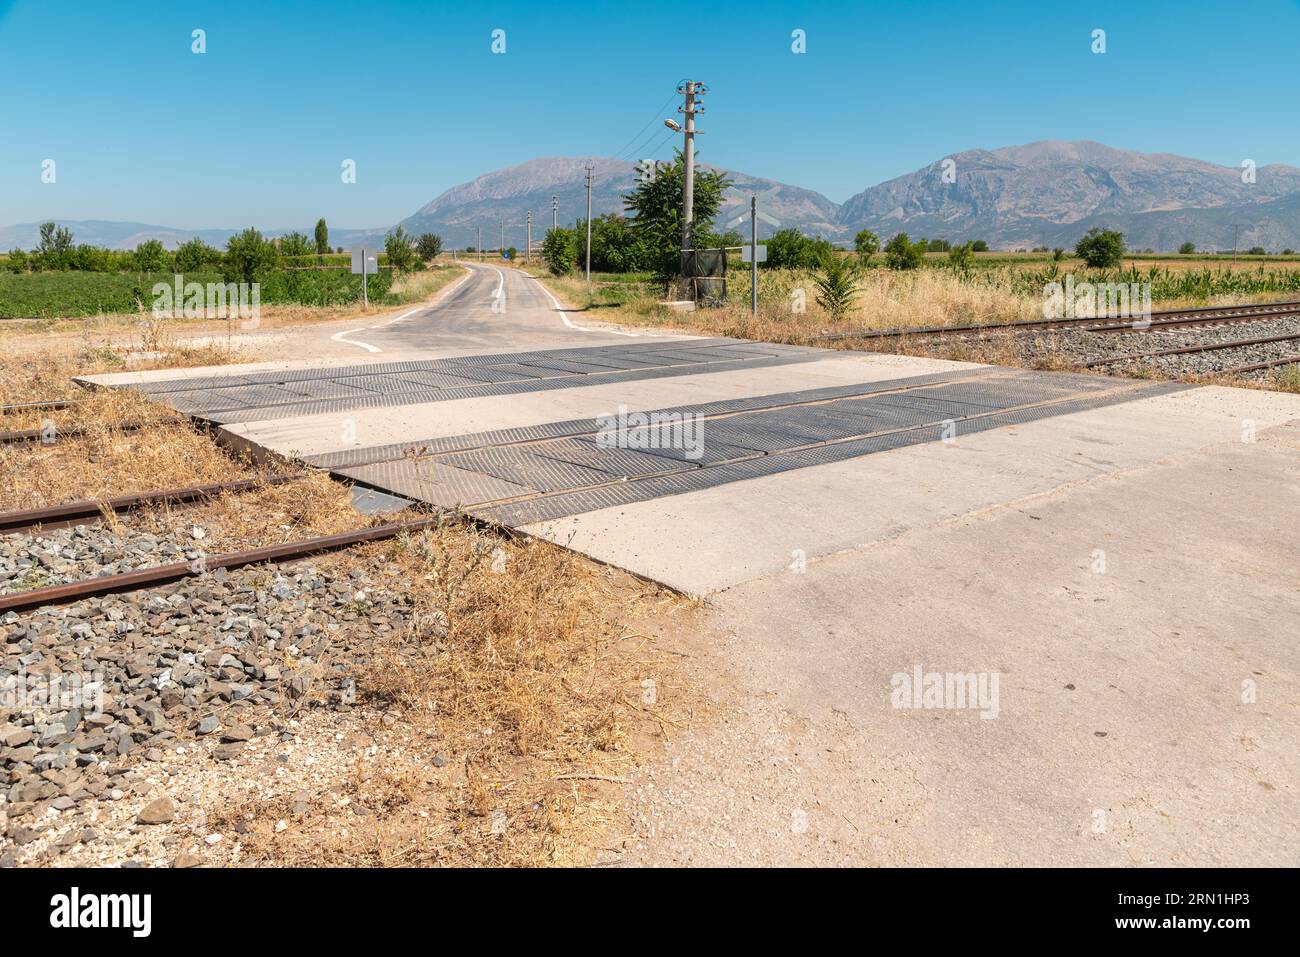 Unguarded, light rail railway crossing without barriers and warning lights Stock Photo